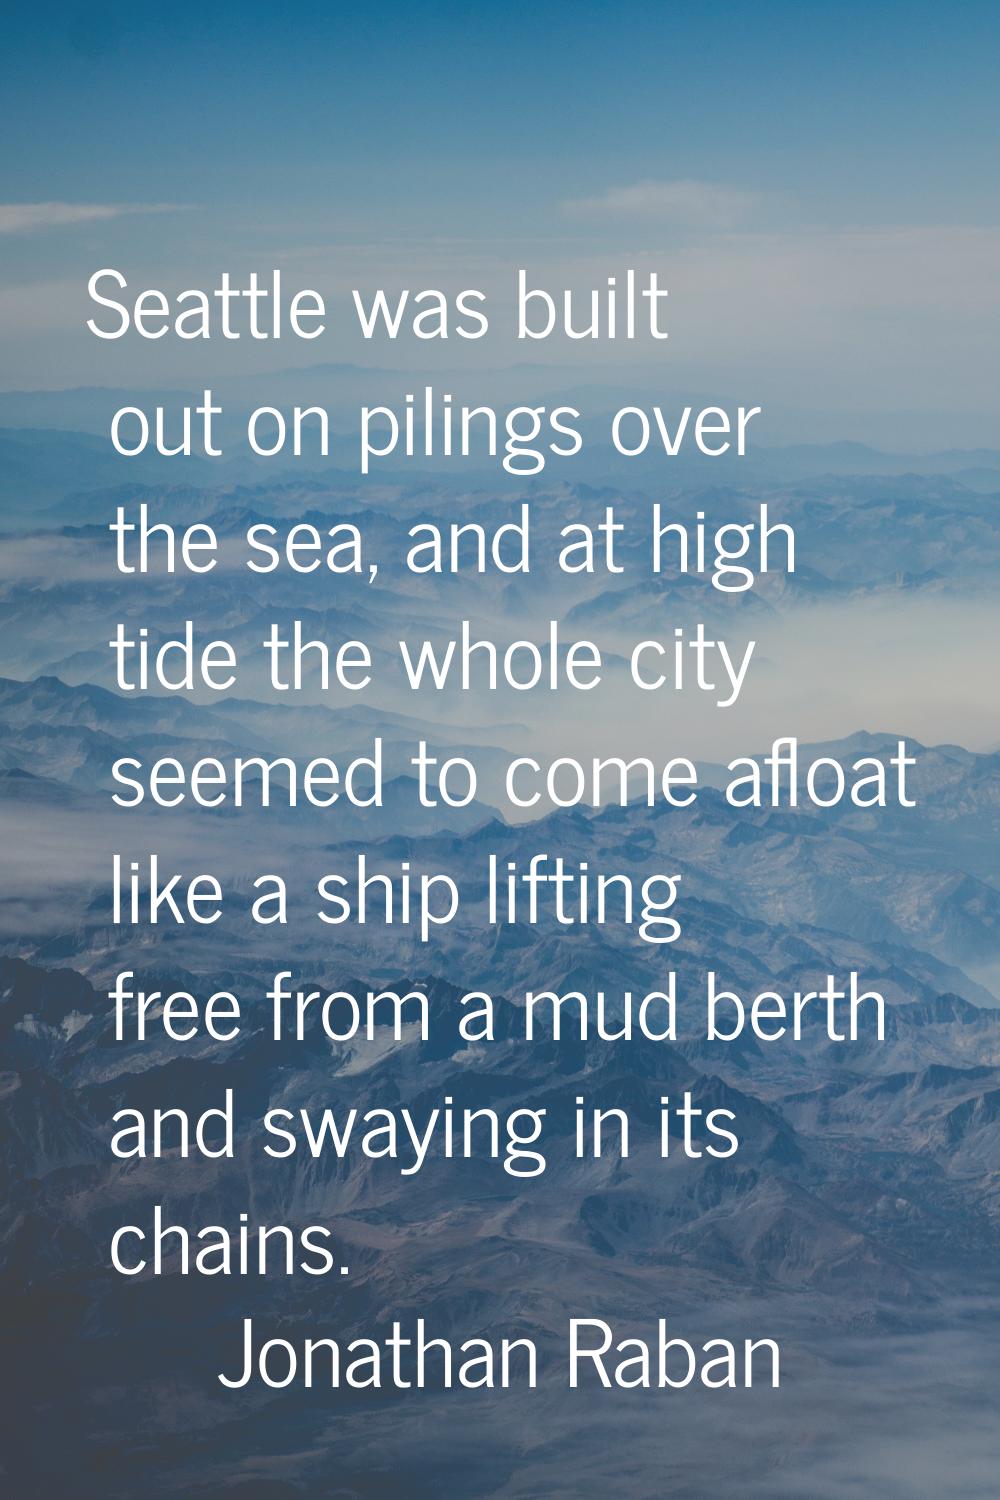 Seattle was built out on pilings over the sea, and at high tide the whole city seemed to come afloa